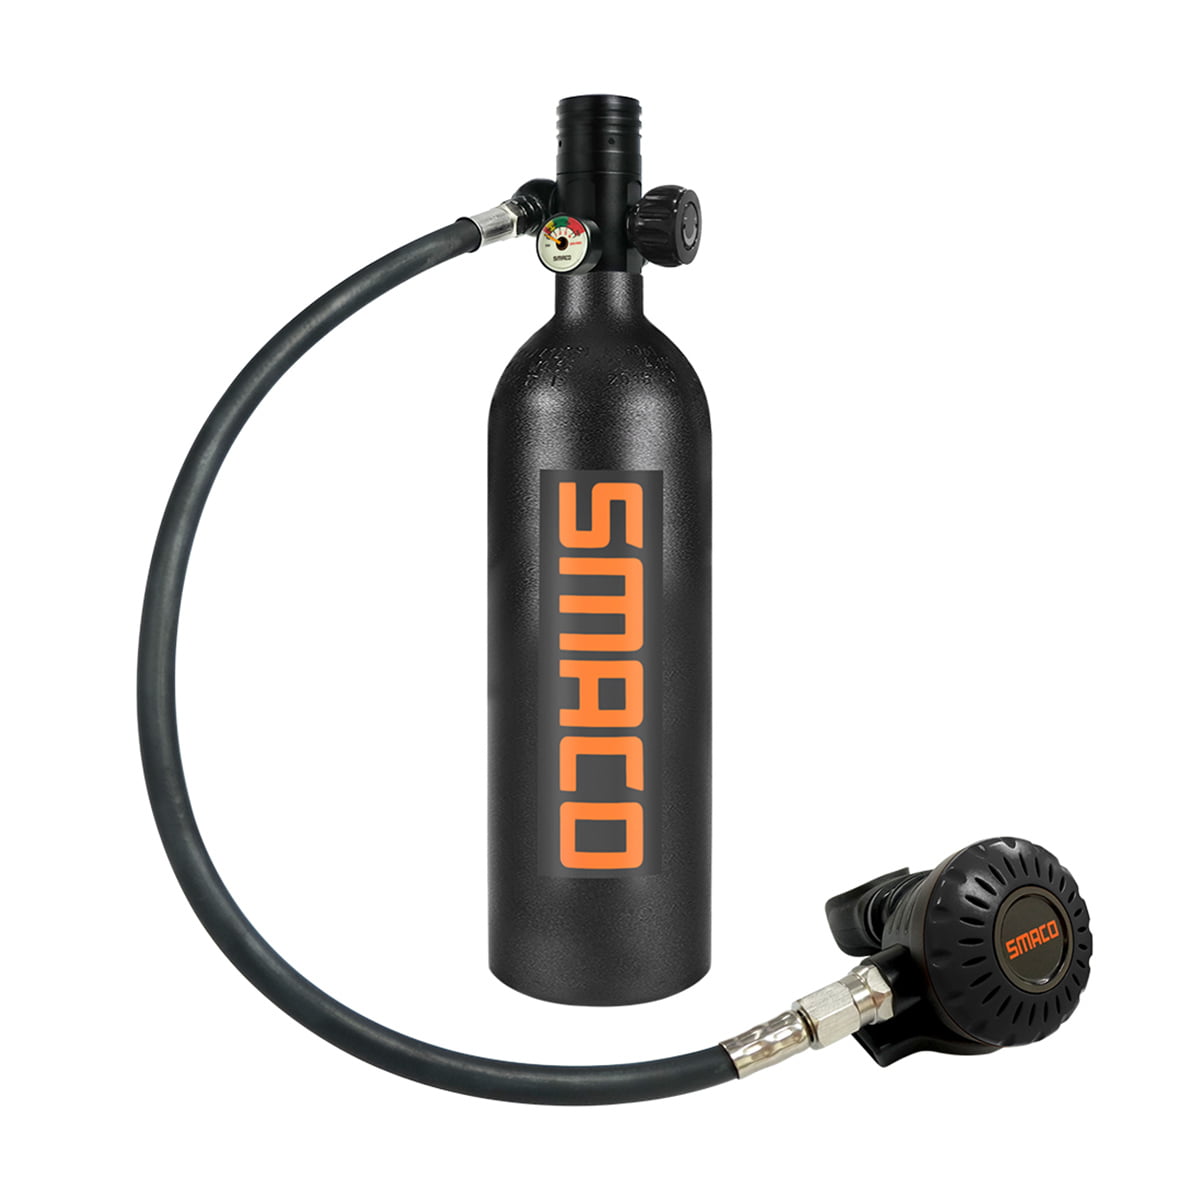 SMACO Scuba Tank Diving Gear for Diver Mini Scuba Tank Oxygen Cylinder with 15-20 Minutes Capability Diving Oxygen Underwater Breathing Device 1L Diving & Snorkeling Equipment S400